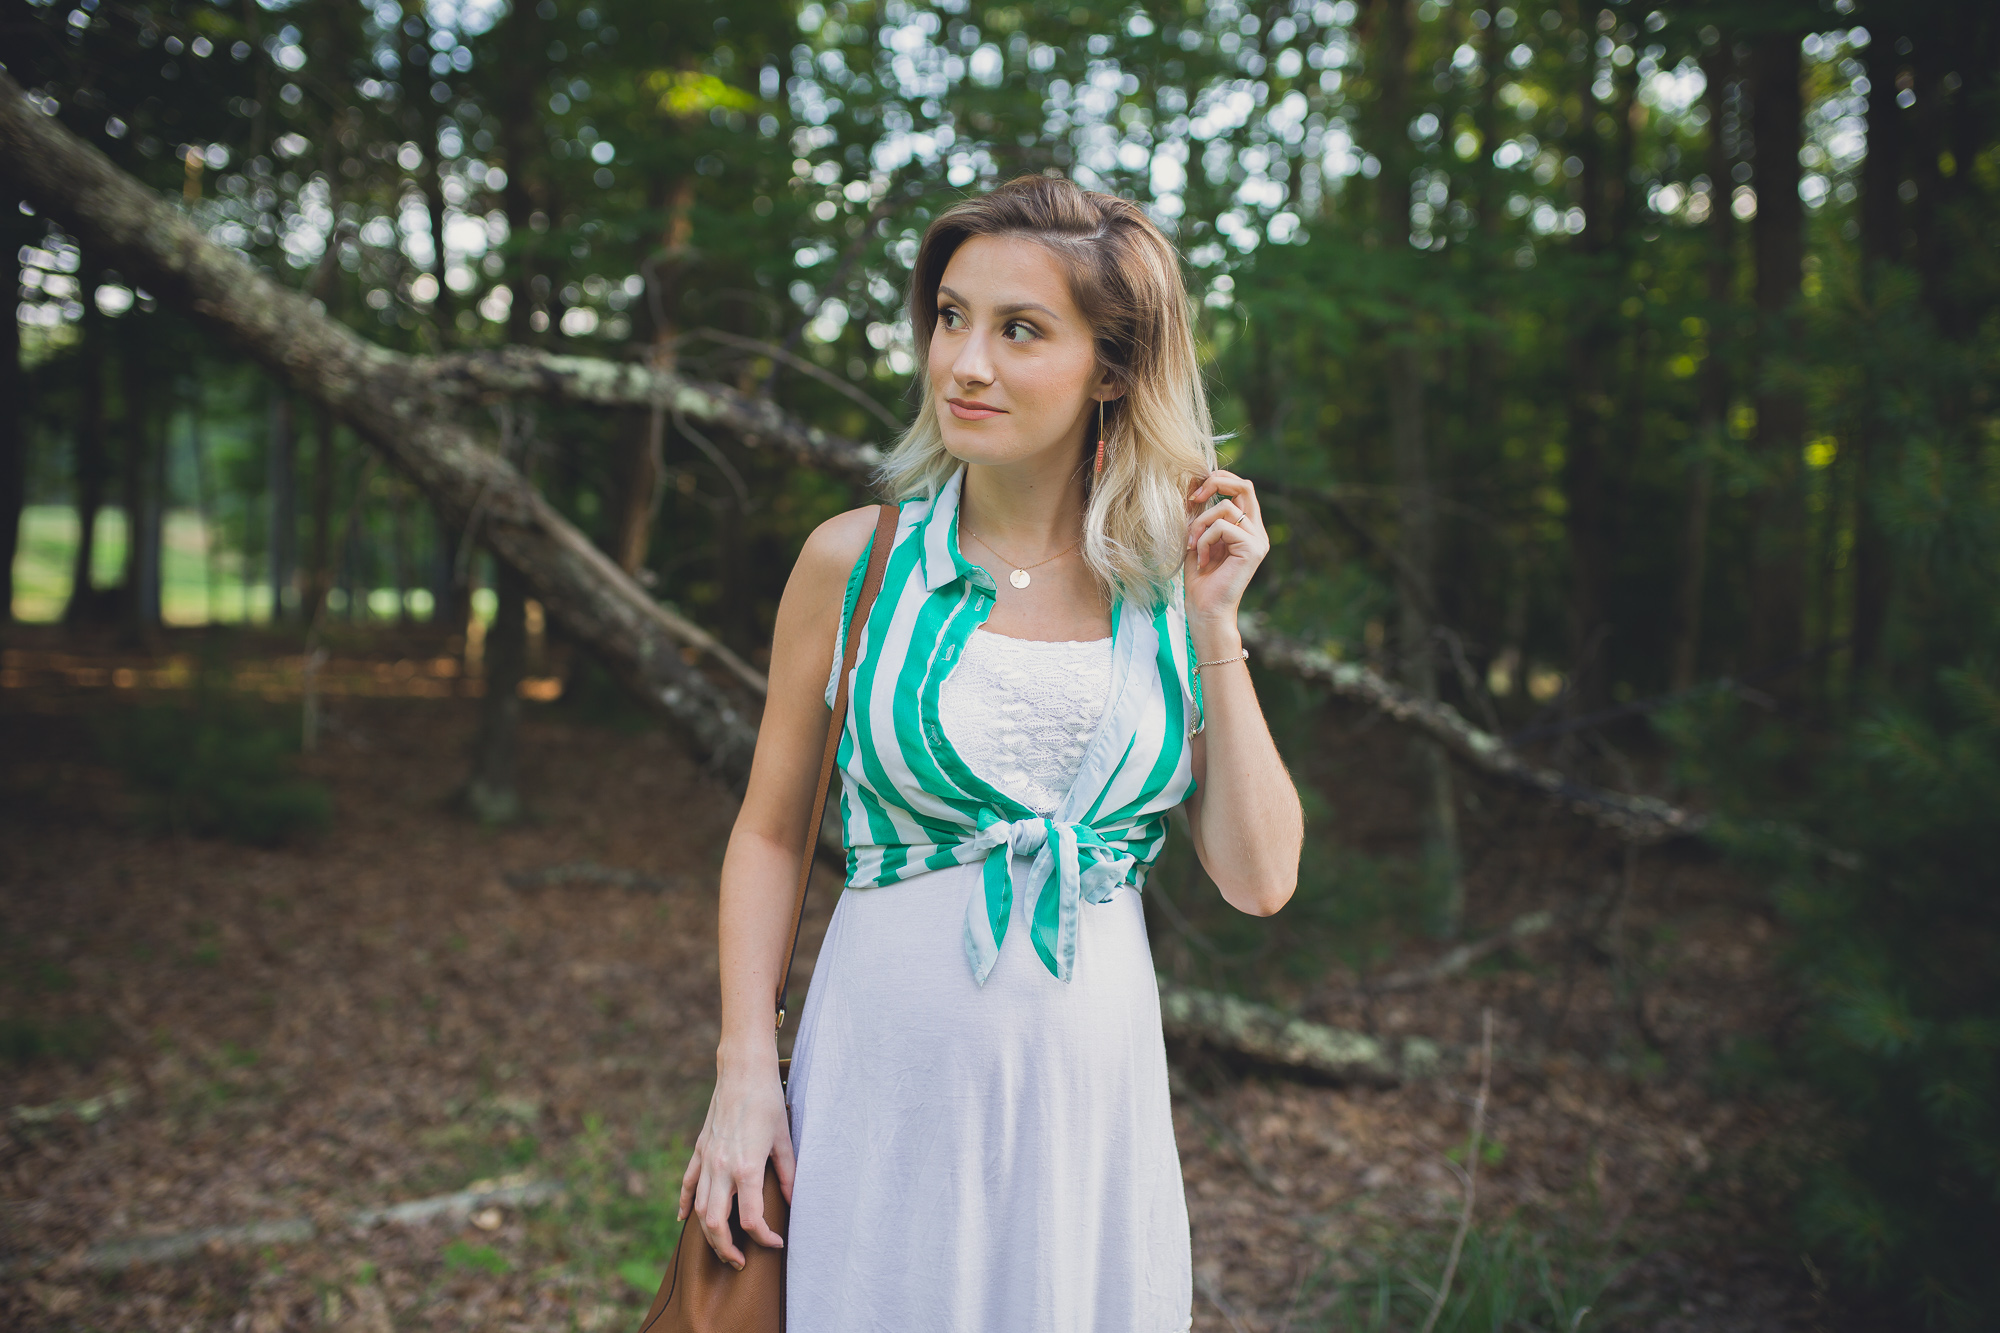 Fashion, lifestyle, and beauty blogger/ vlogger wearing maternity fashion a white sundress with green stripe accents and jewelry from CY Design Studio and Tory Burch Sandals.